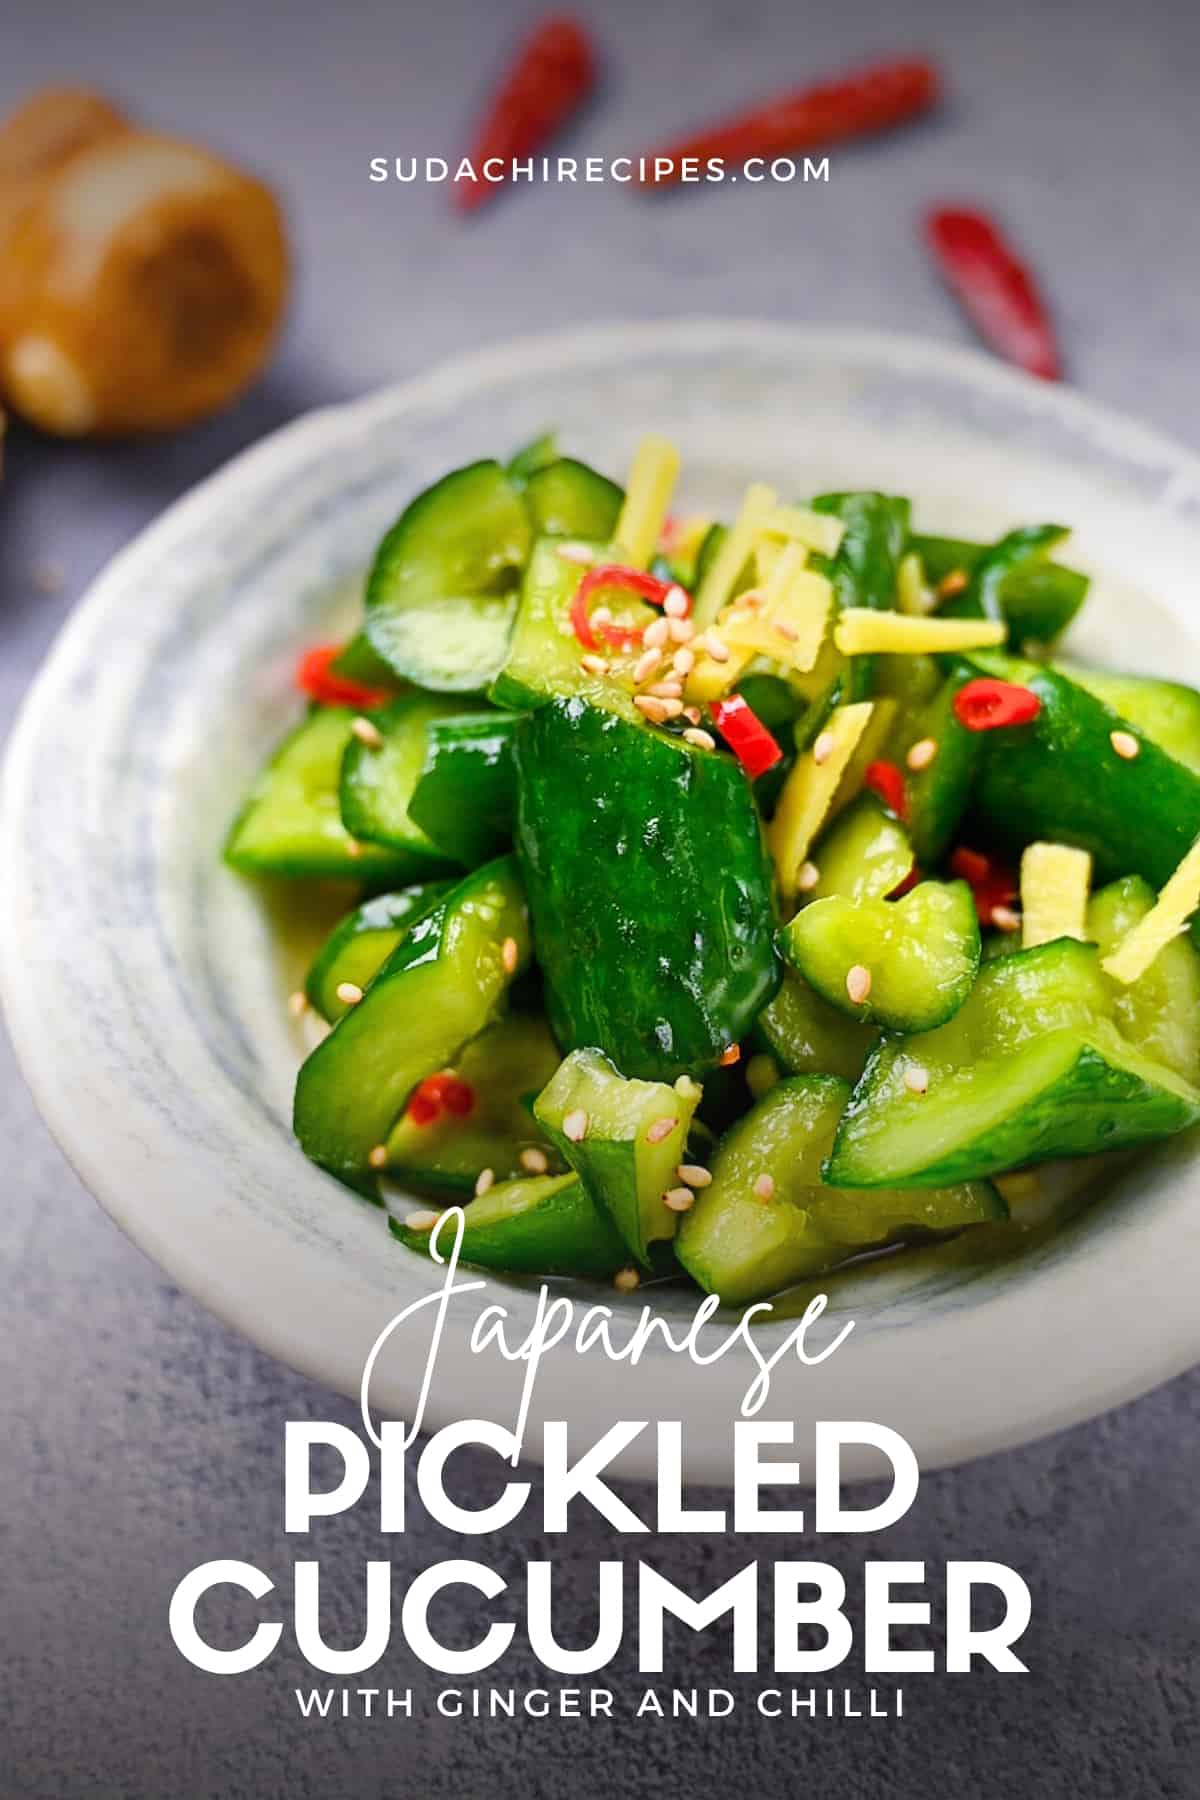 Japanese pickled cucumbers with ginger and chili in a white dish